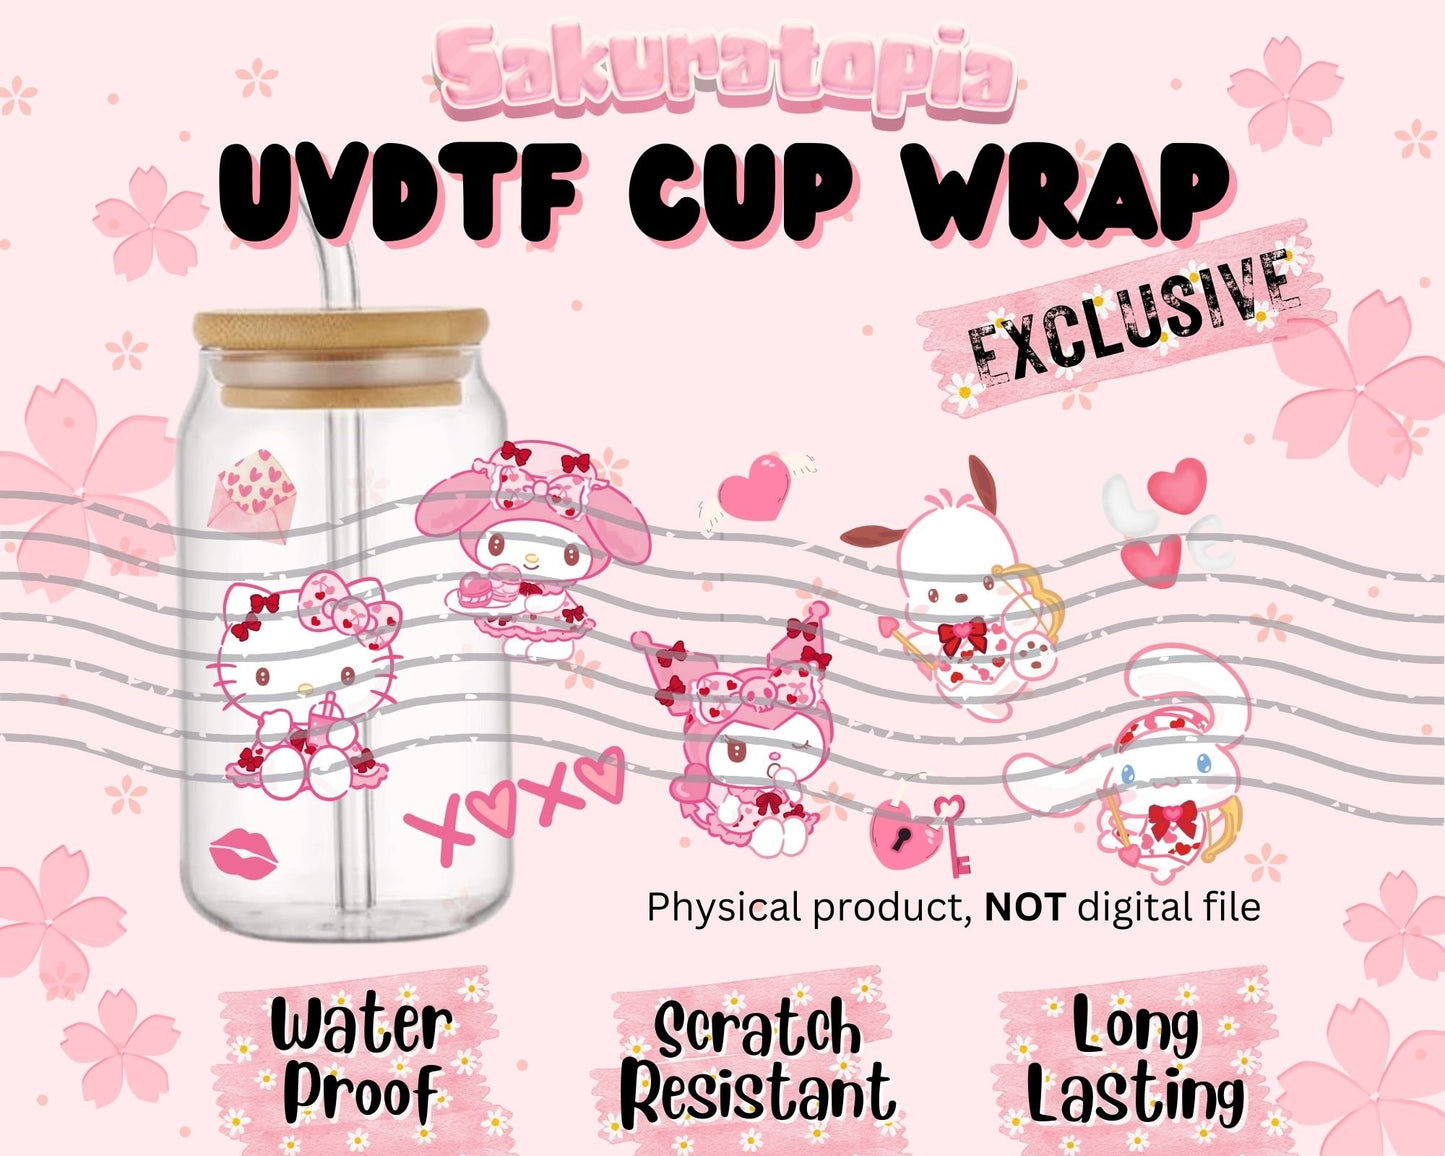 UVDTF Sanrio Valentine's Day Kawaii Cat Cup Wrap, Ready to use UVDTF for Glass Cup , Valentines Day Libbey glass wrap, Beer can glass 16oz wrap